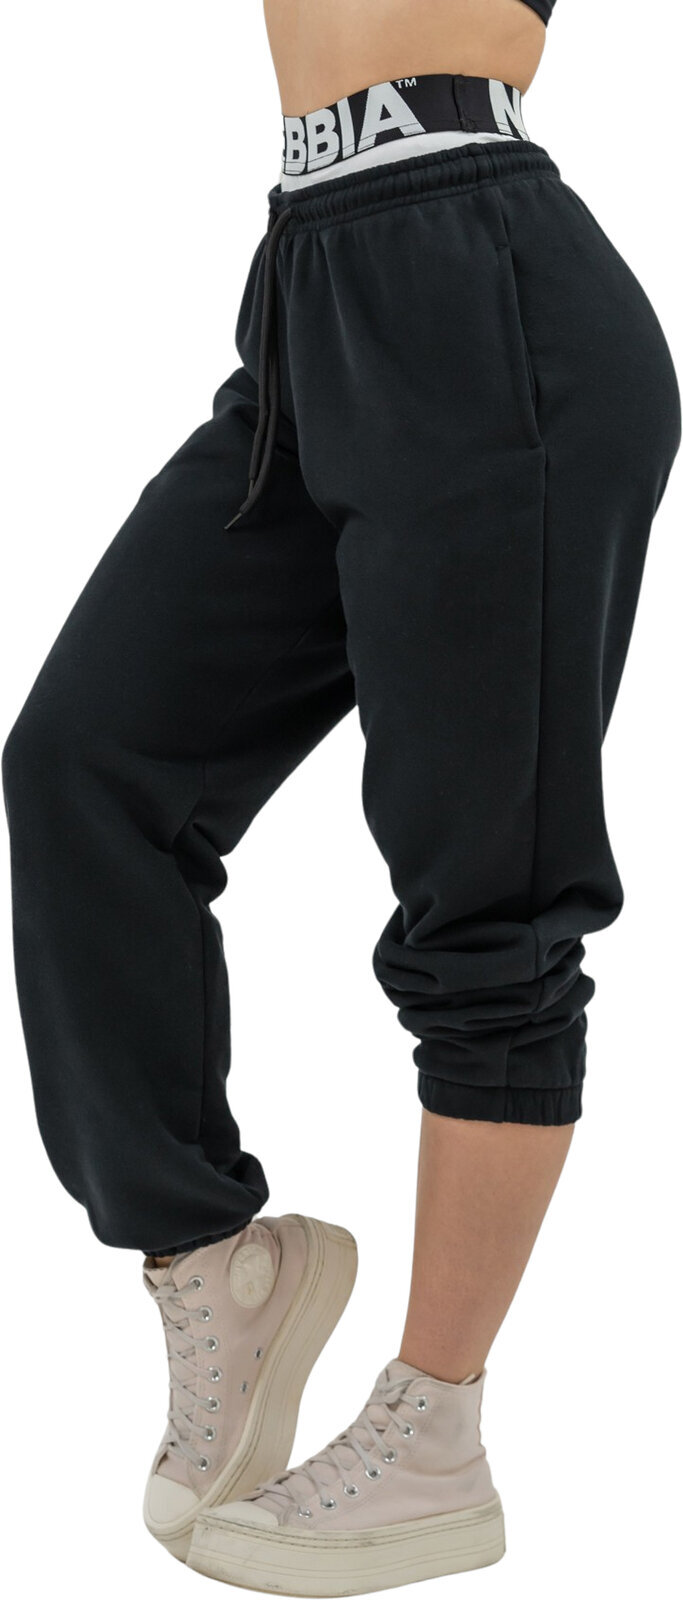 Fitness Trousers Nebbia Fitness Sweatpants Muscle Mommy Black M Fitness Trousers